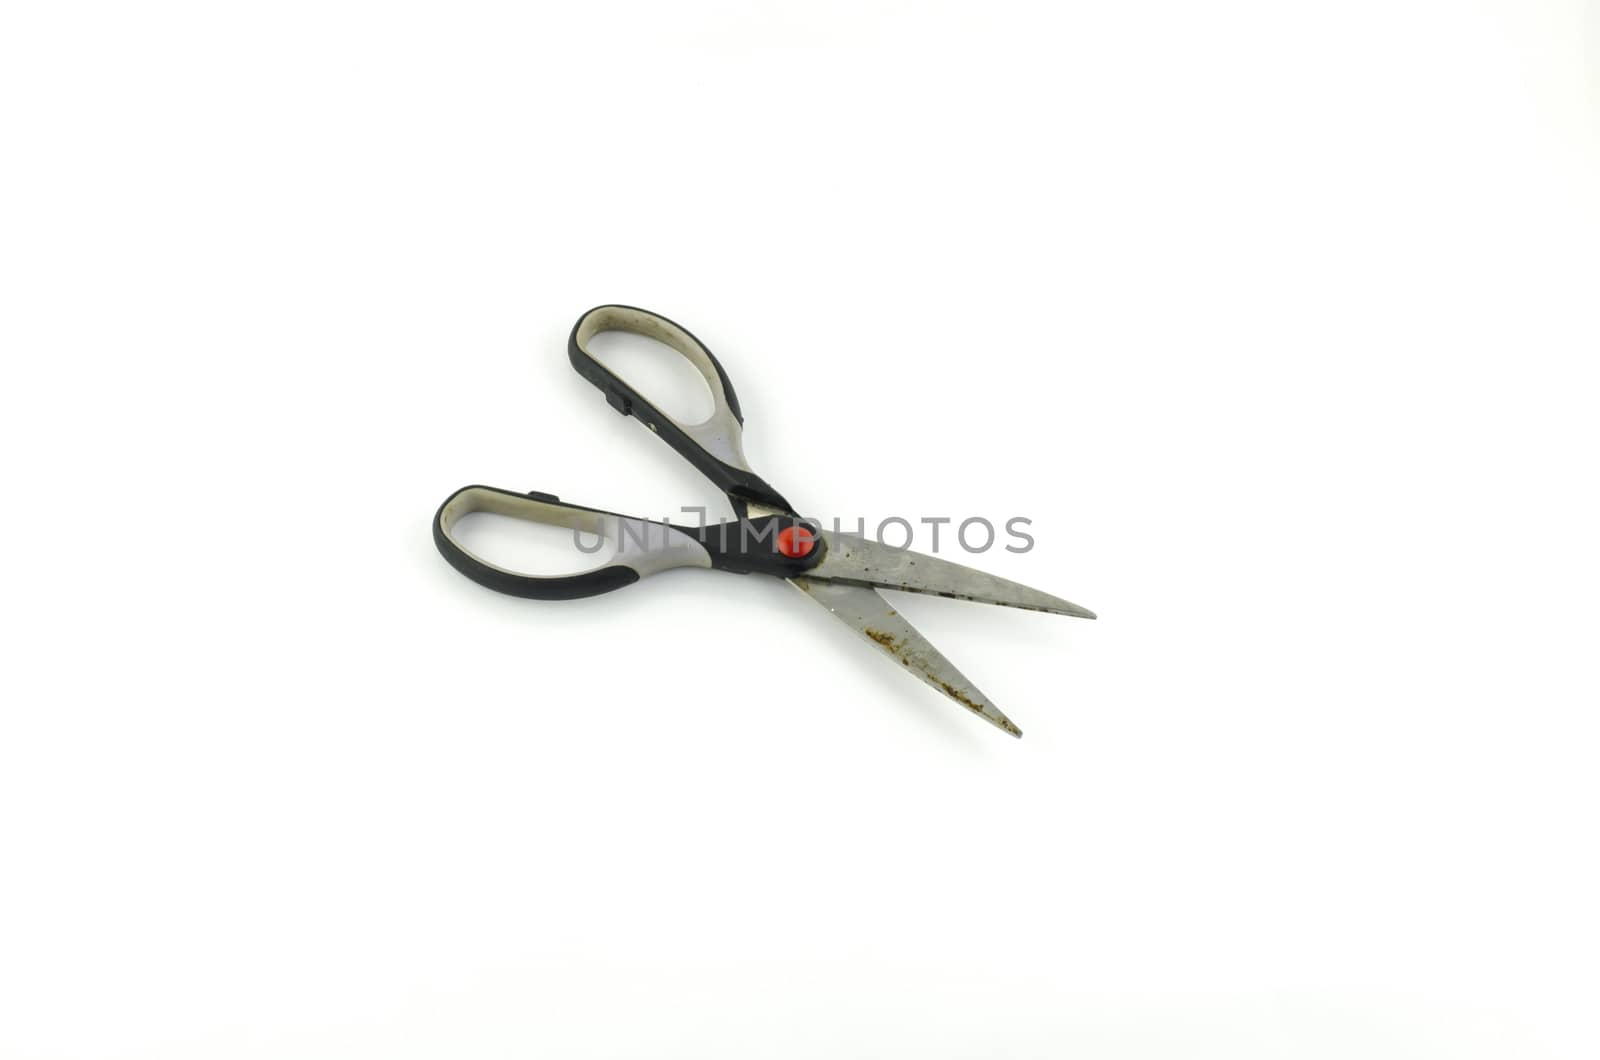 Scissors isolated on white by ammza12